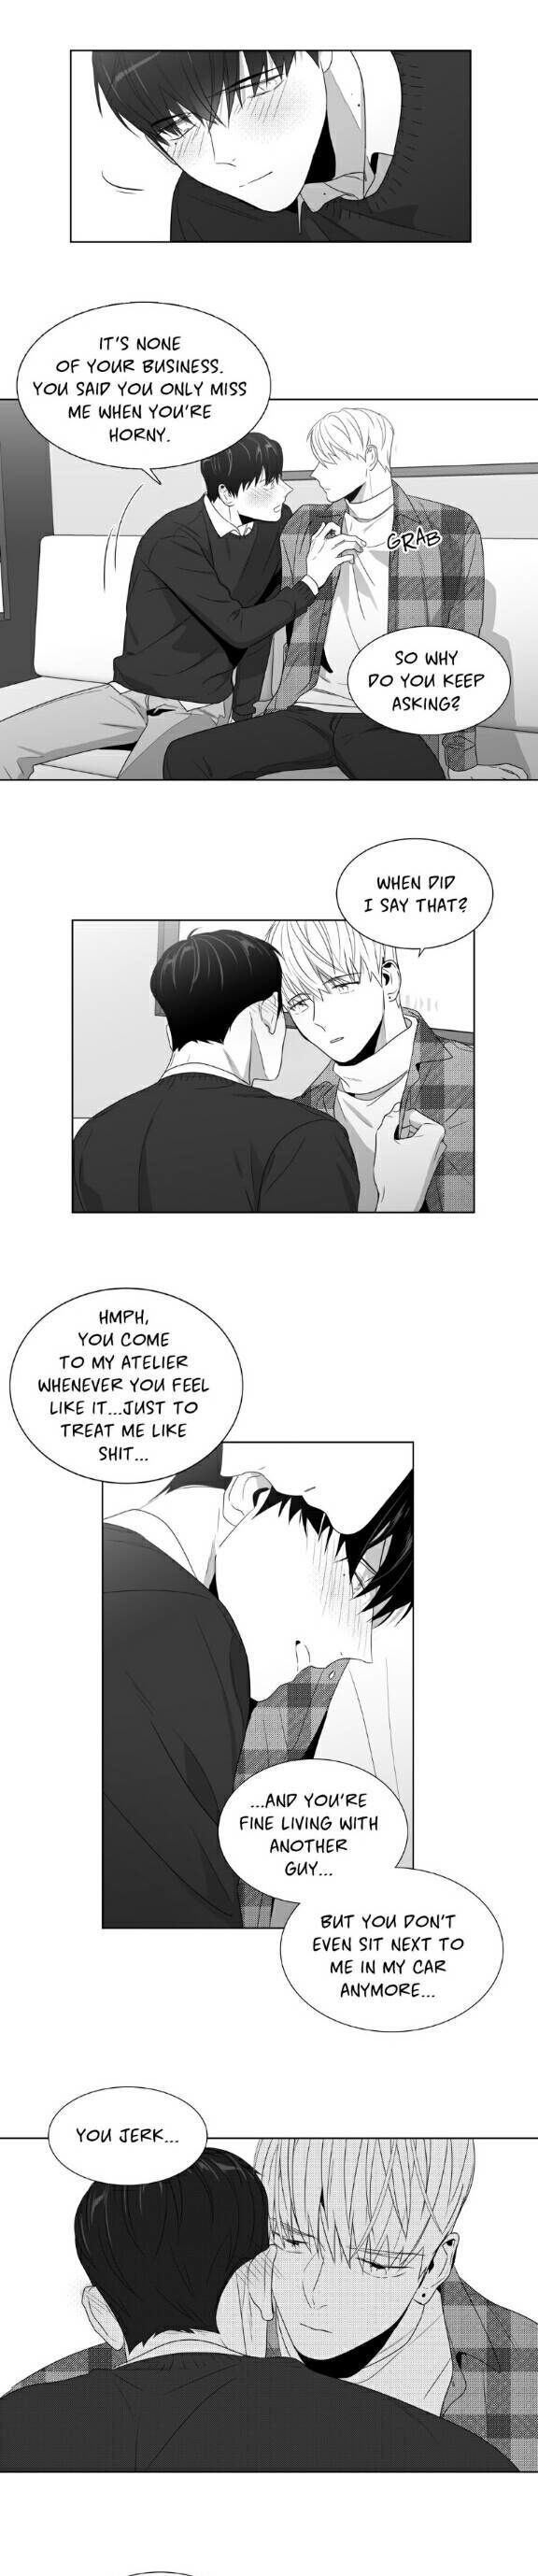 Lover Boy (Lezhin) Chapter 058 page 13